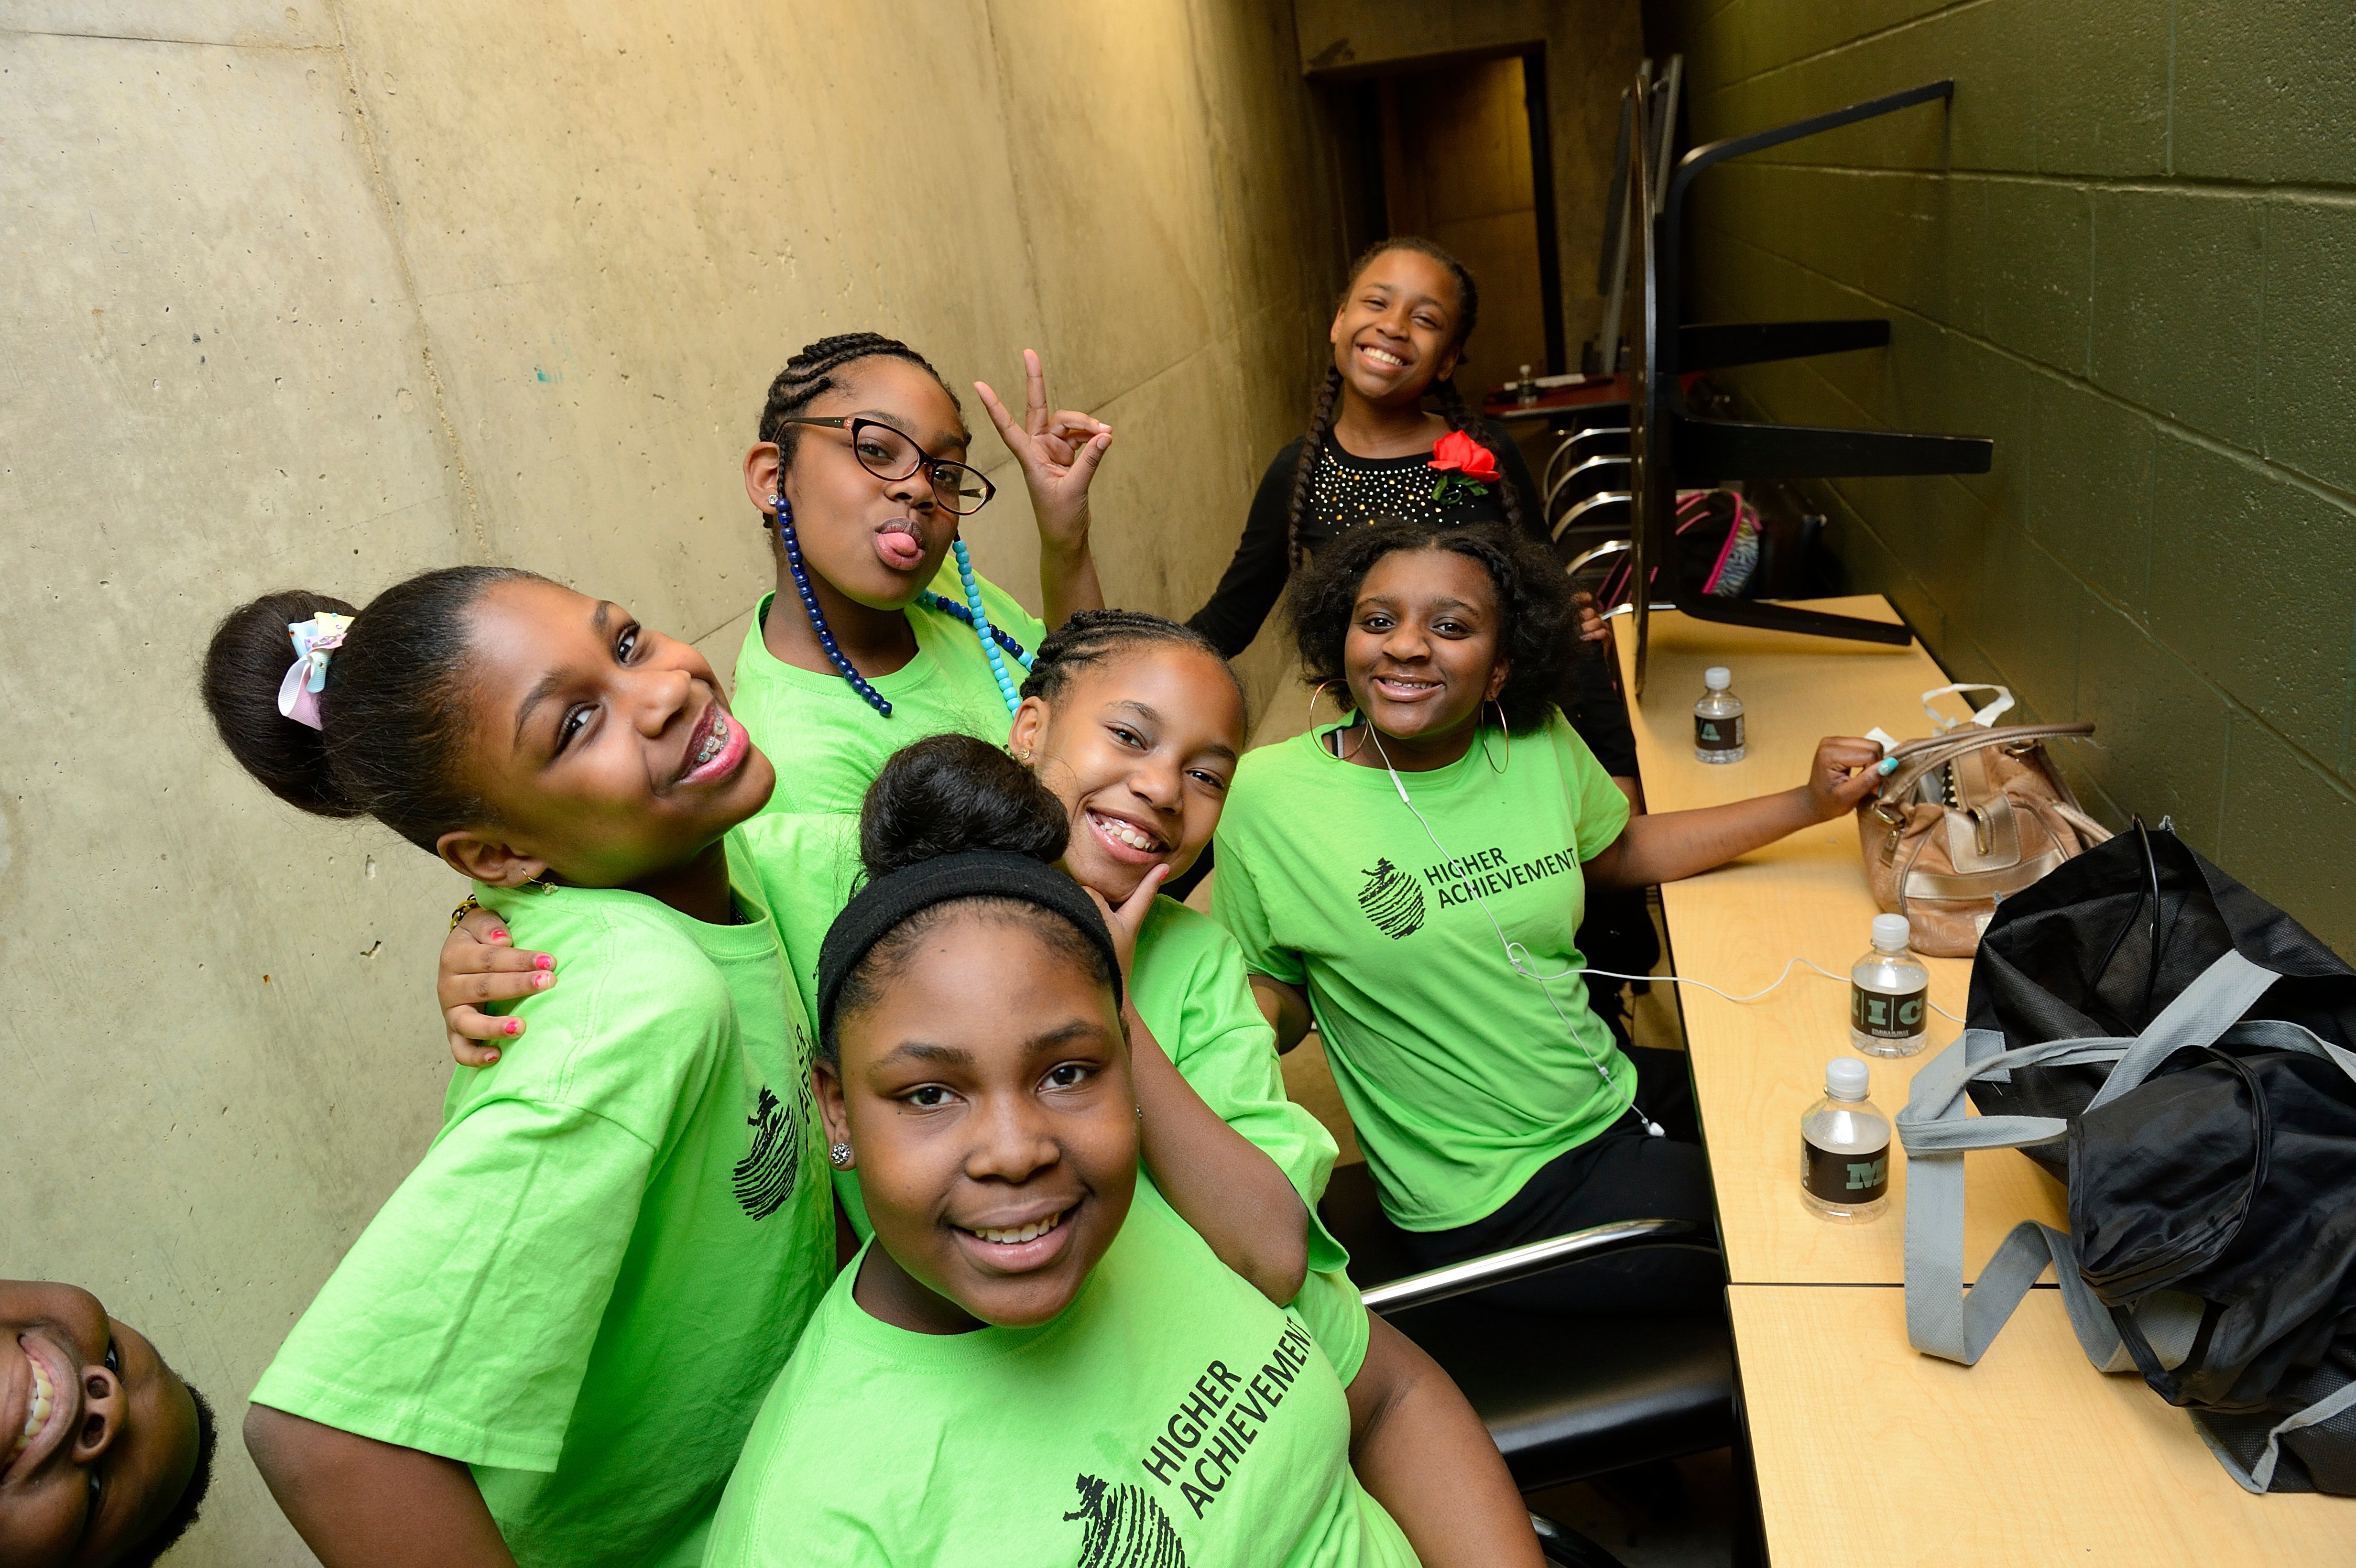 Baltimore middle-schoolers backstage at a performance of poetry written by Higher Achievement students.